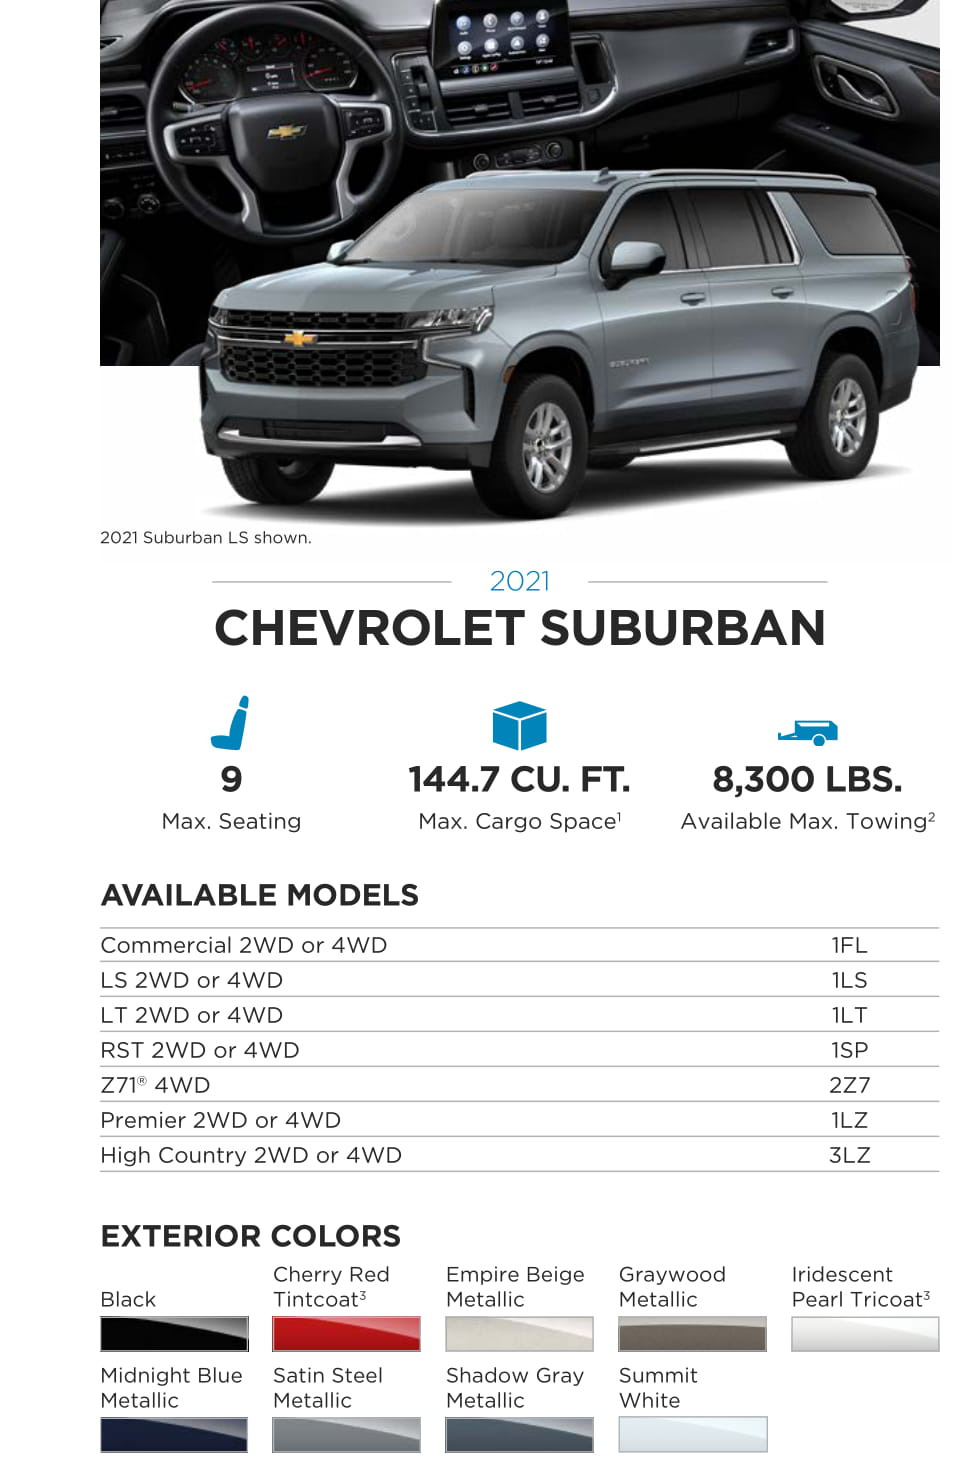 Models and Paint Colors used for this Chevy Vehicle in 2021